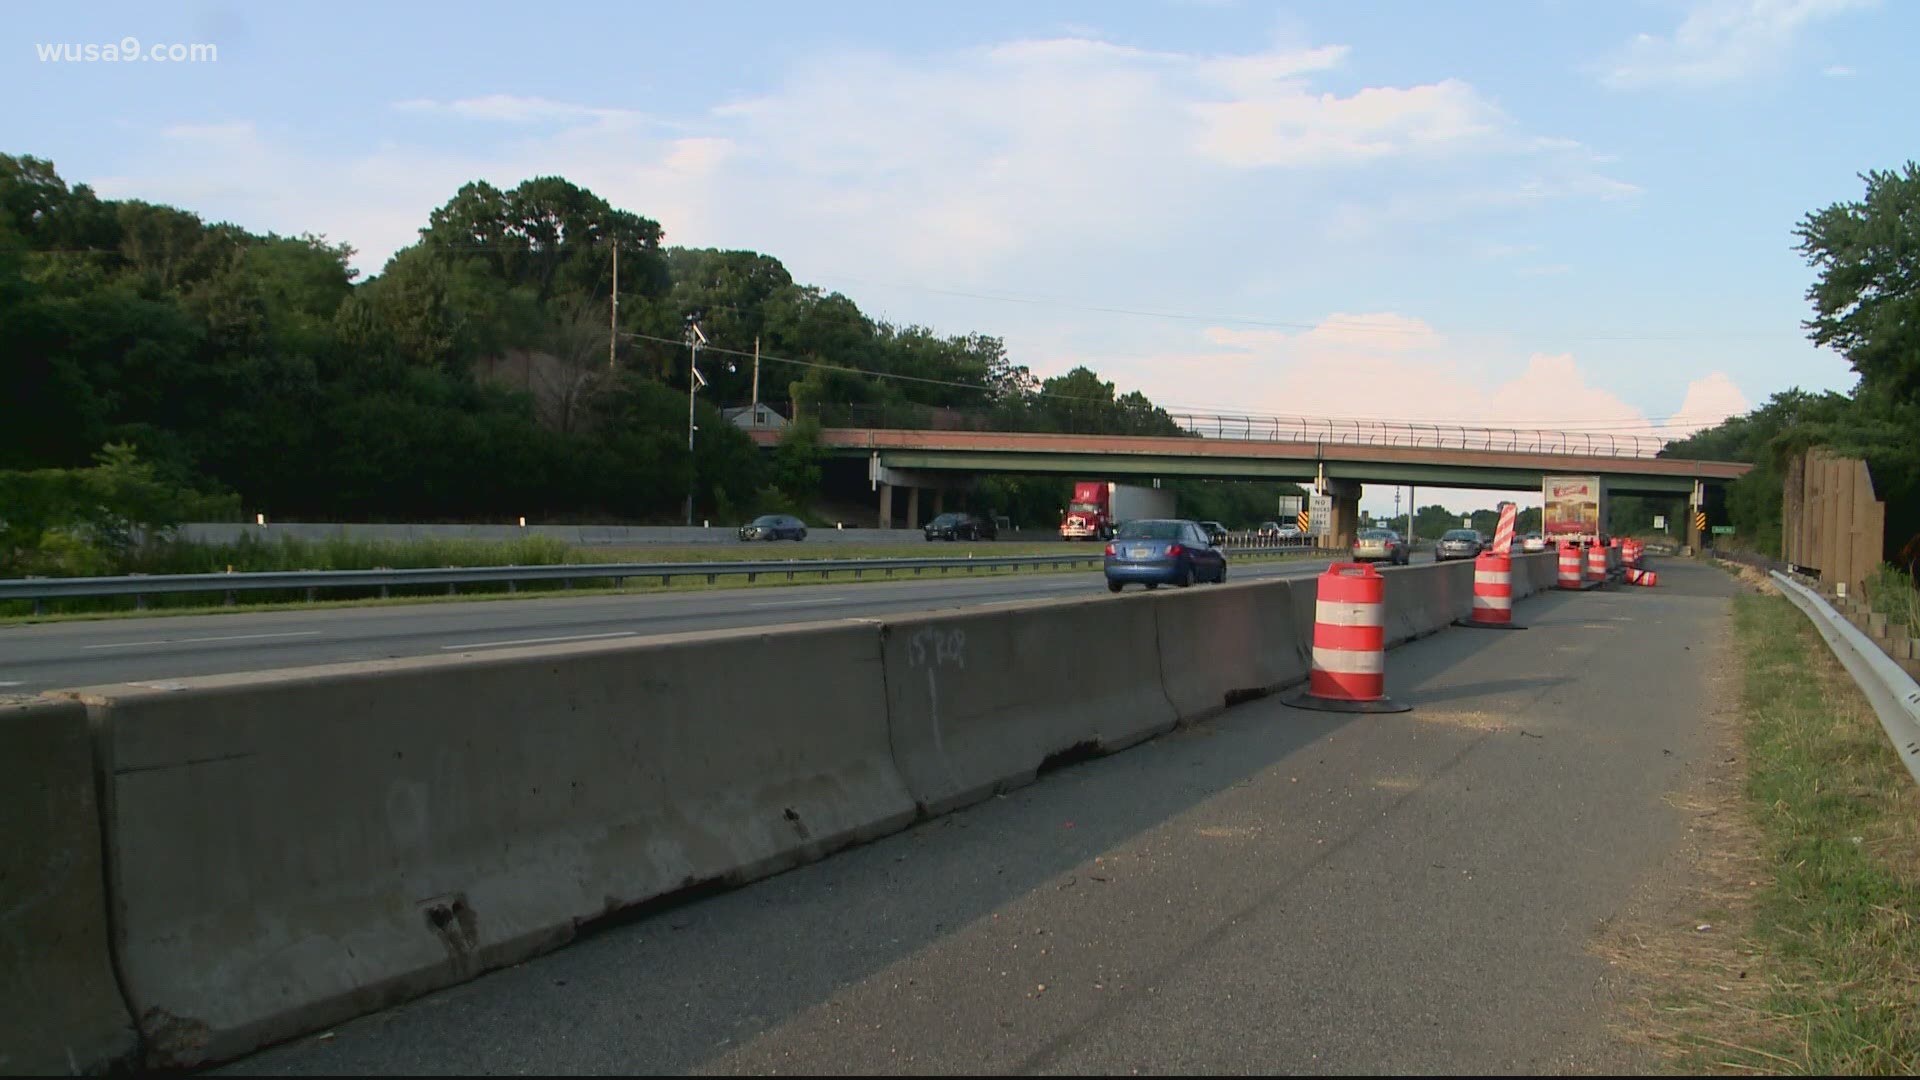 Leaders from around the region voted against the project to widen I-270 and add express lanes to the Beltway due to environmental concerns.